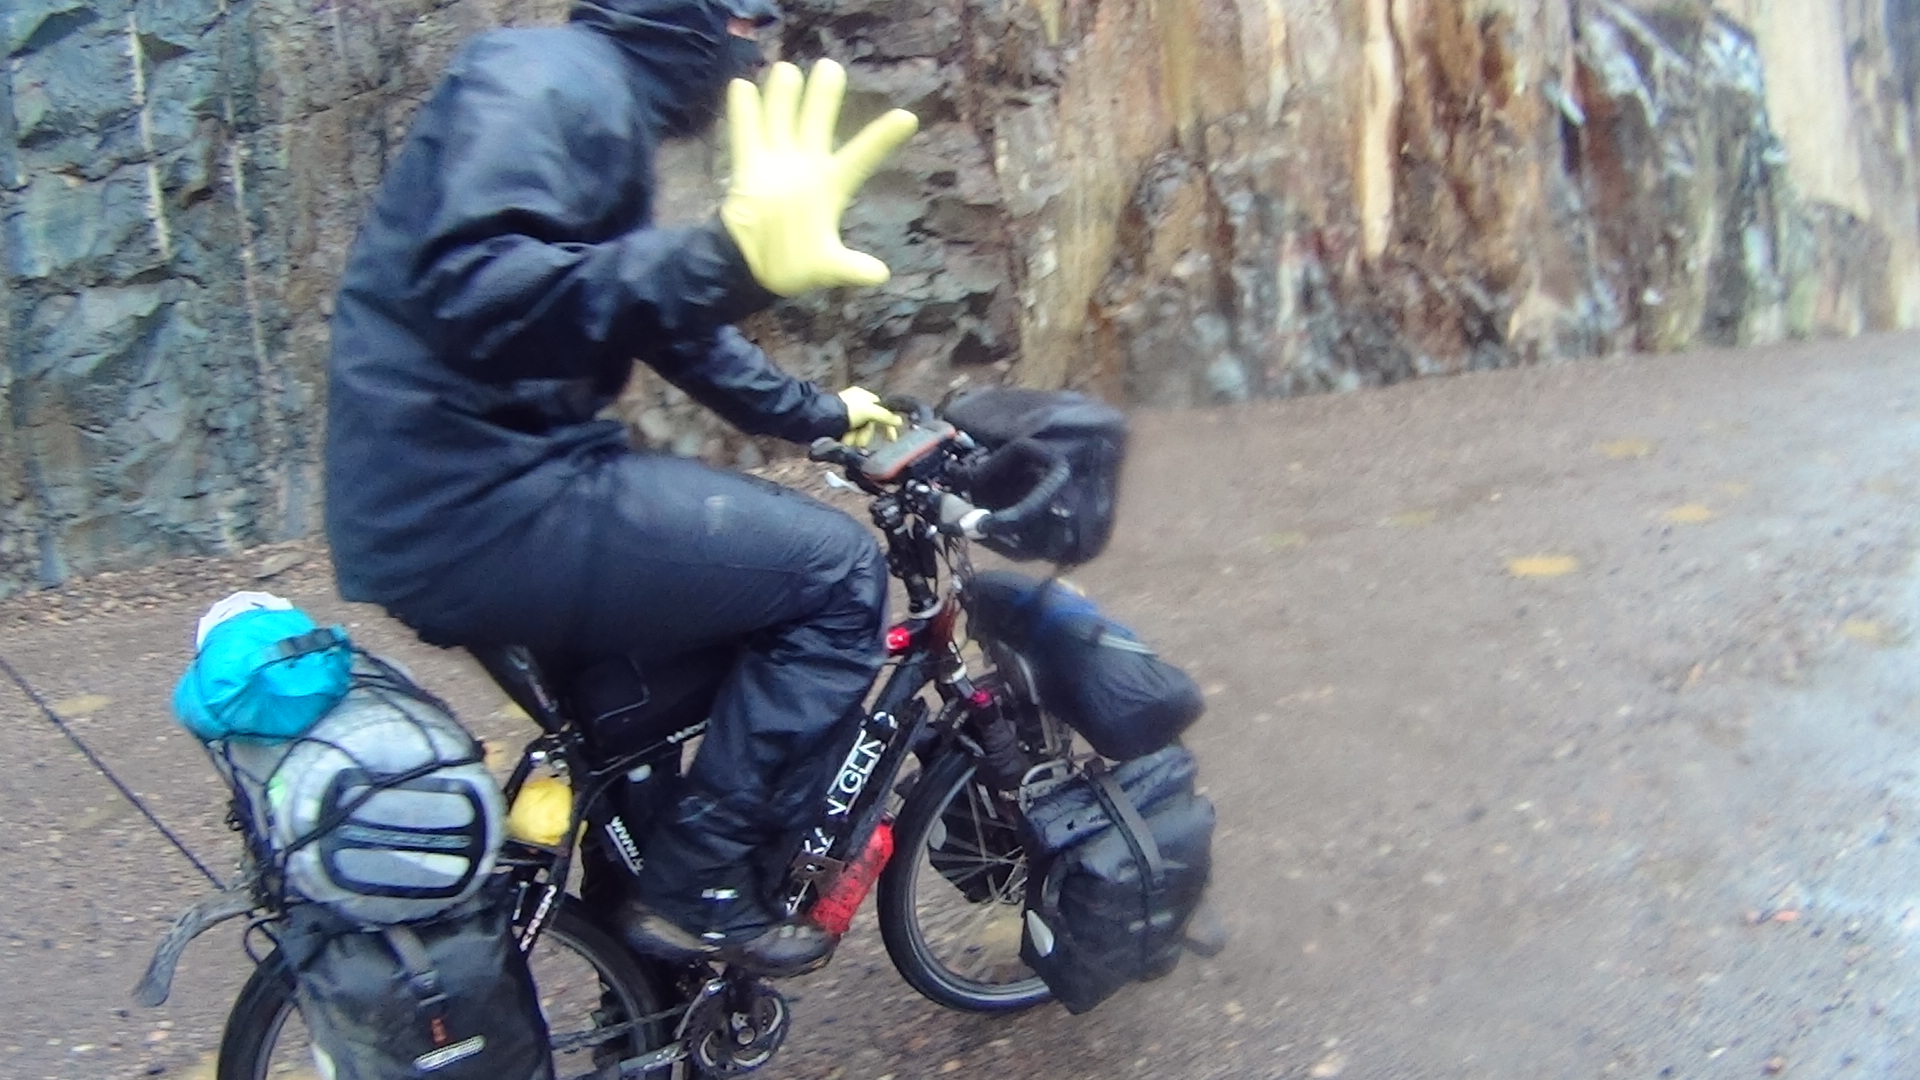 Yellow rubber gloves over inner gloves. Excellent for keeping hands dry. Why didn't I do that before? A bout of cold afternoon rain forces on full wet weather gear.